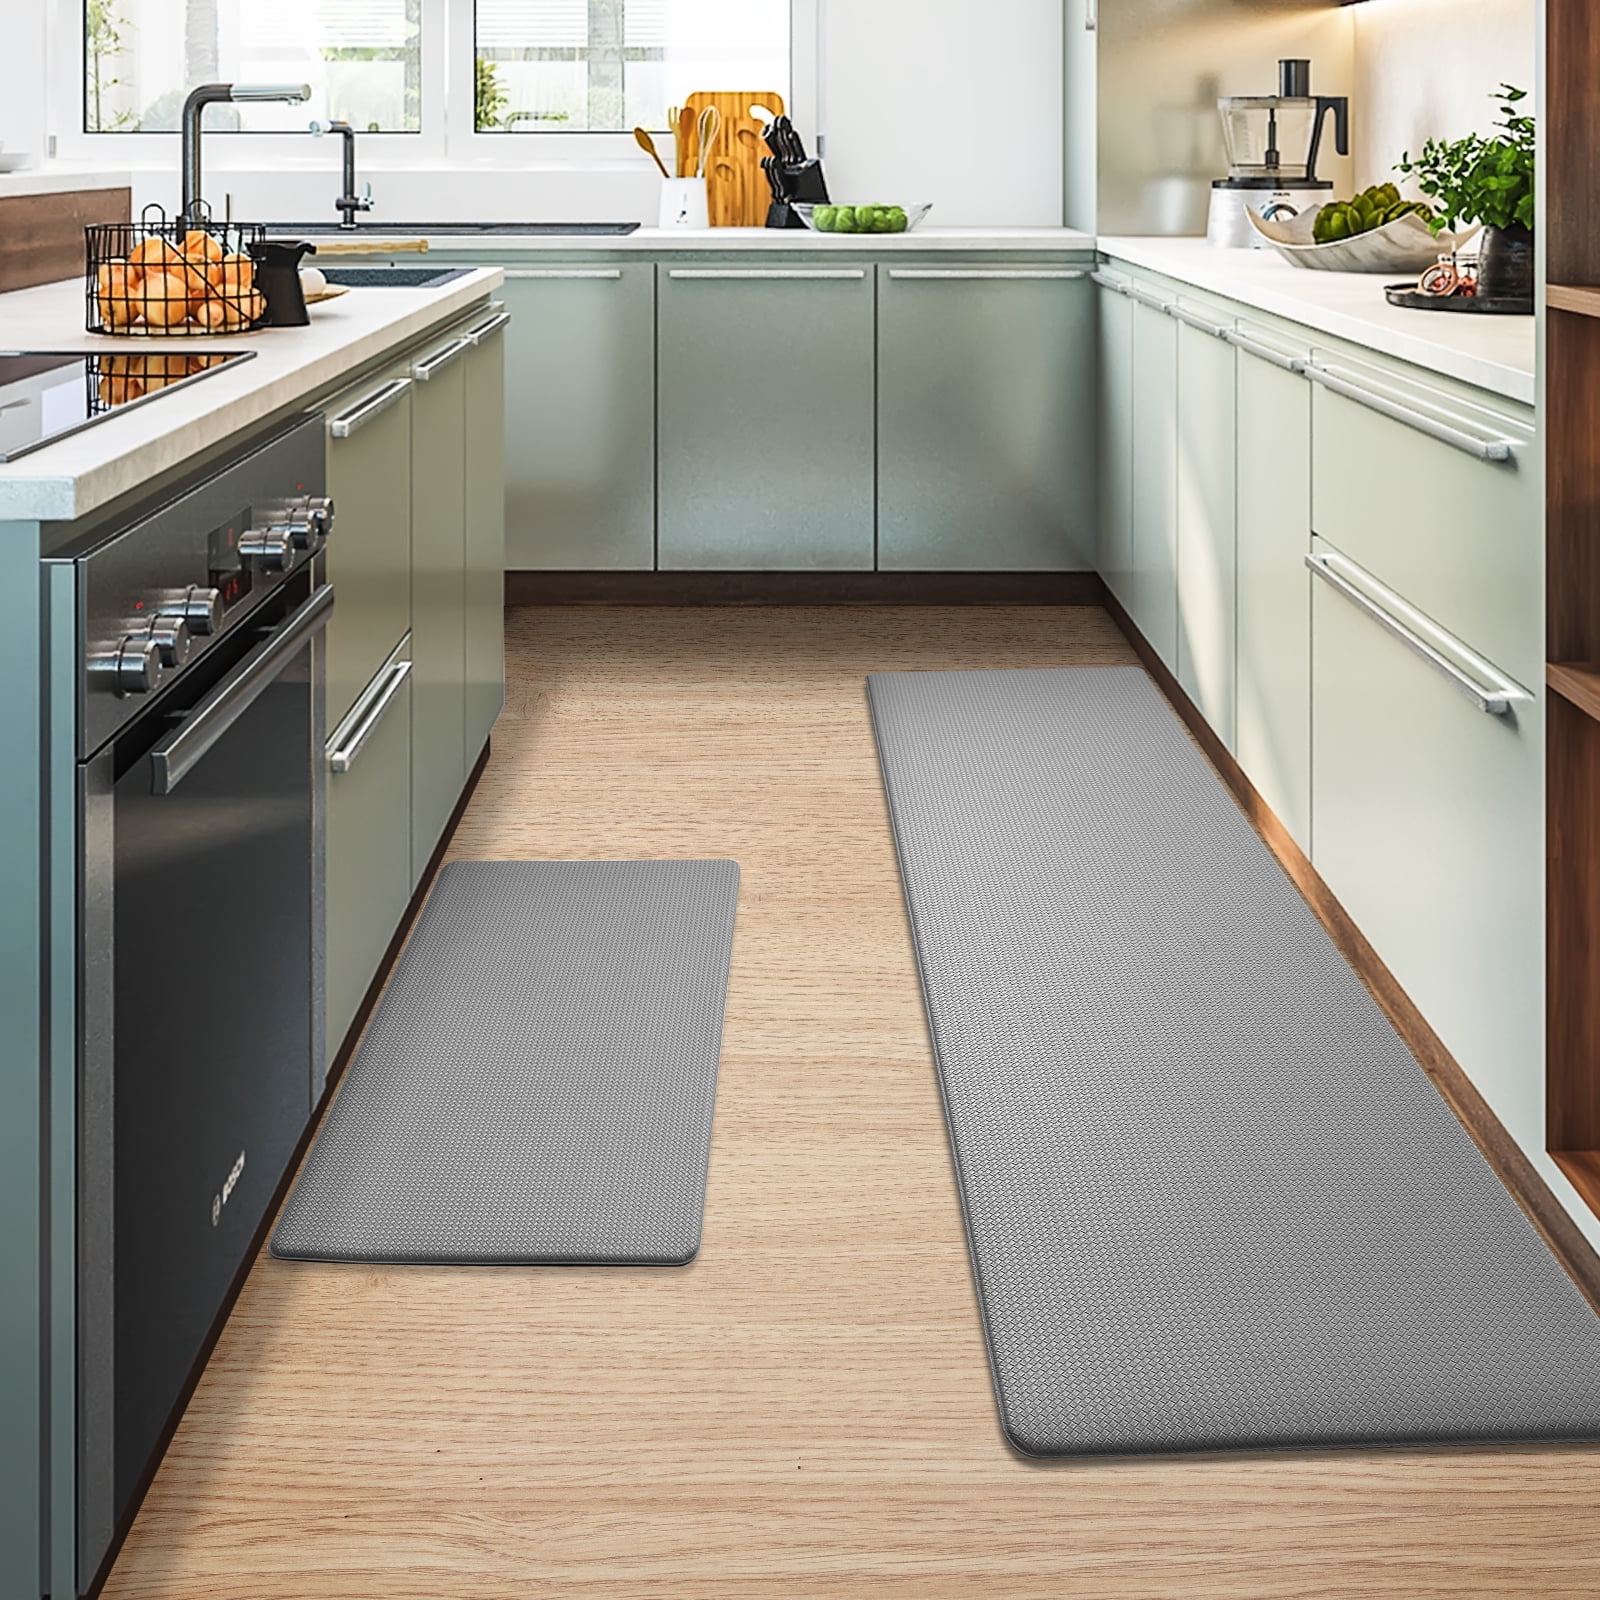 KitchenLit Kitchen Mat (2 PCS), Cushioned Anti Fatigue Kitchen Rug,  Stainproof Kitchen Rugs and Mats Non Skid Washable, Memory Foam Kitchen Rug  Set, Heavy Duty …